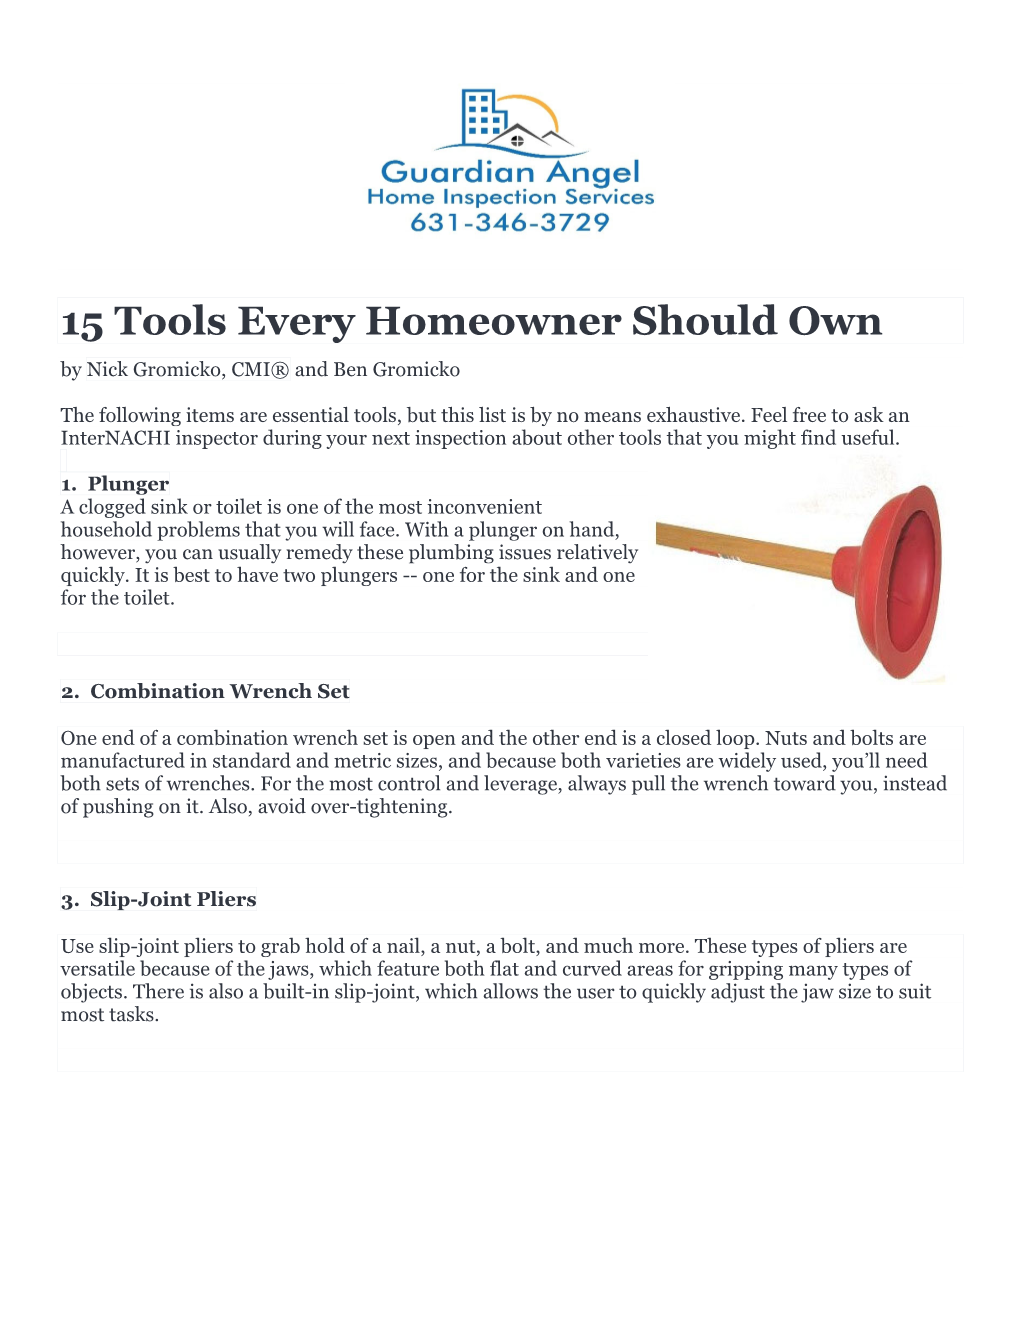 15 Tools Every Homeowner Should Own by Nick Gromicko, CMI® and Ben Gromicko